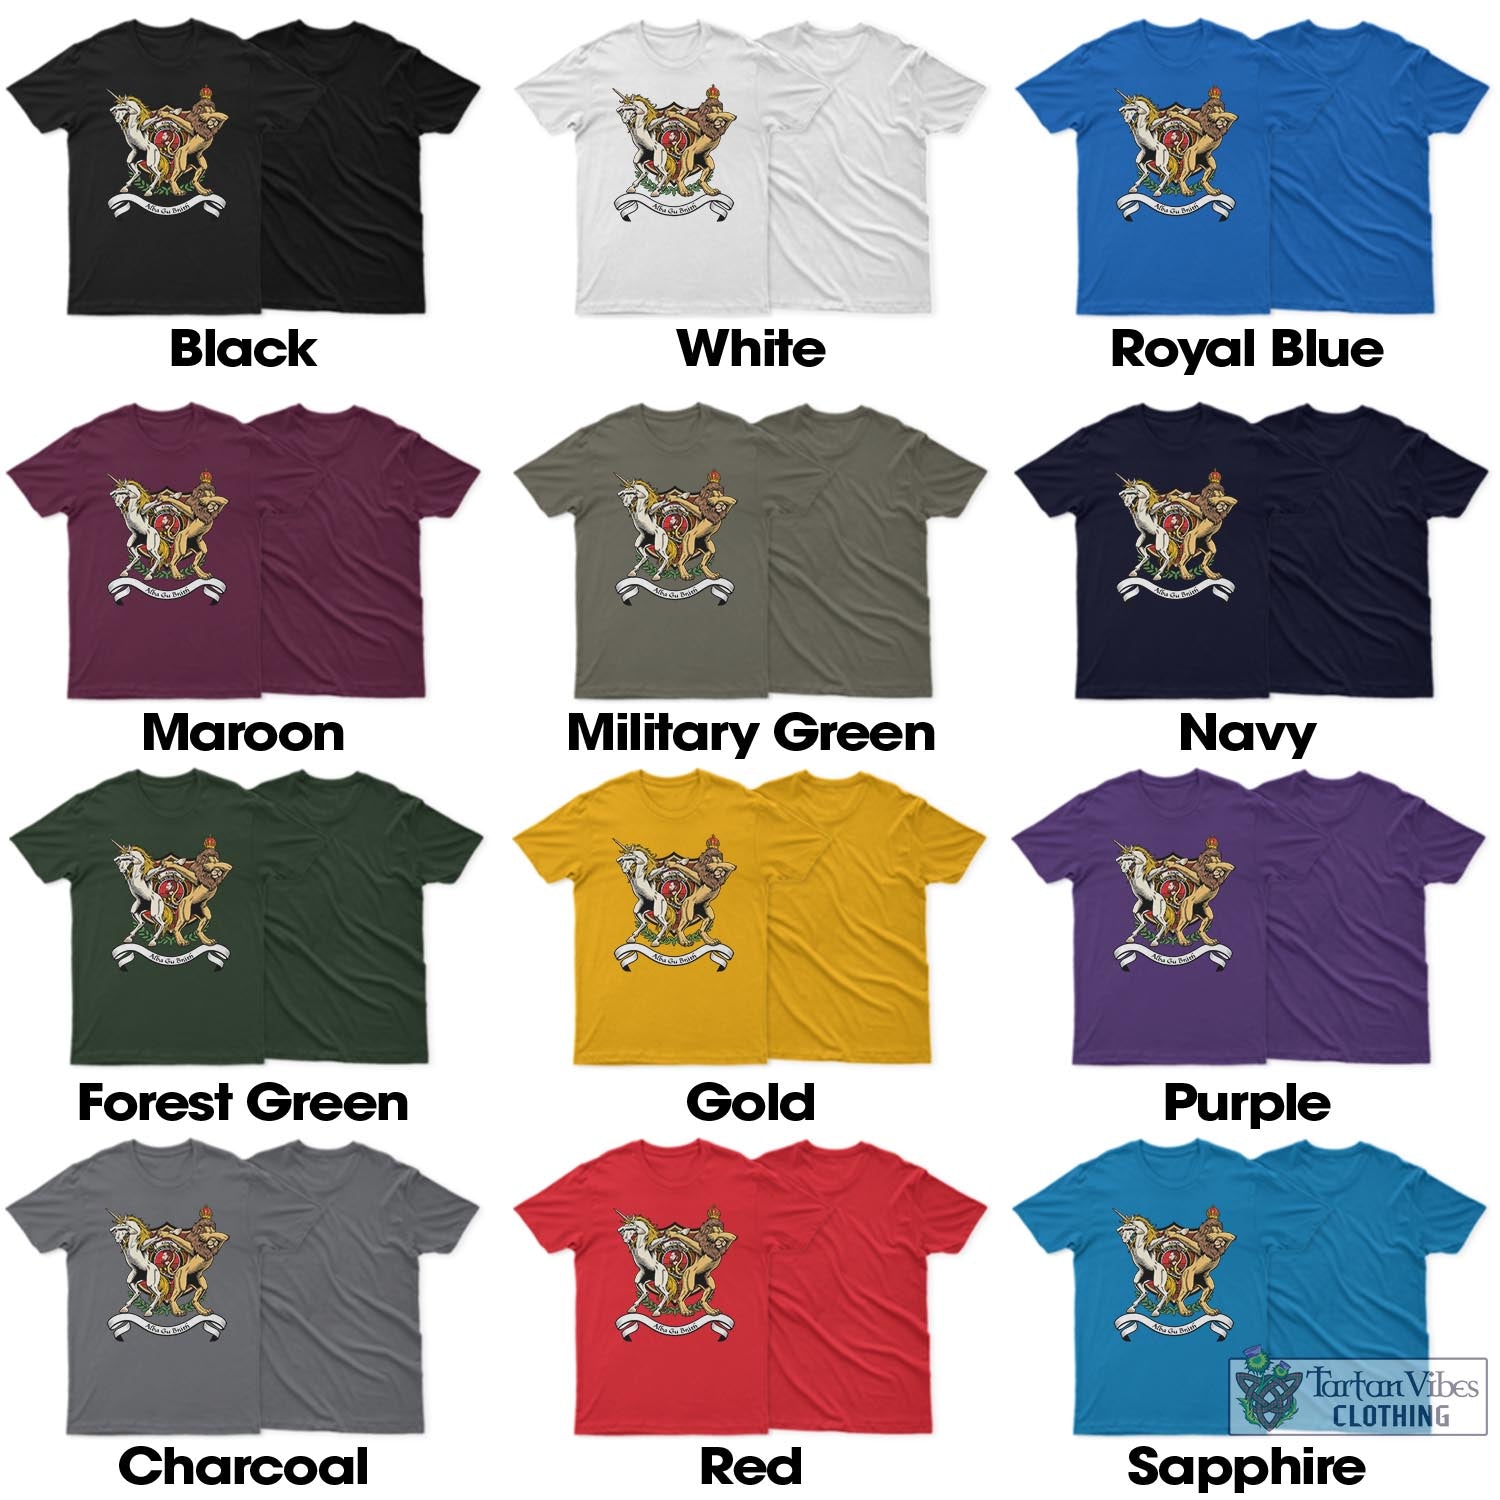 Tartan Vibes Clothing Adair Family Crest Cotton Men's T-Shirt with Scotland Royal Coat Of Arm Funny Style